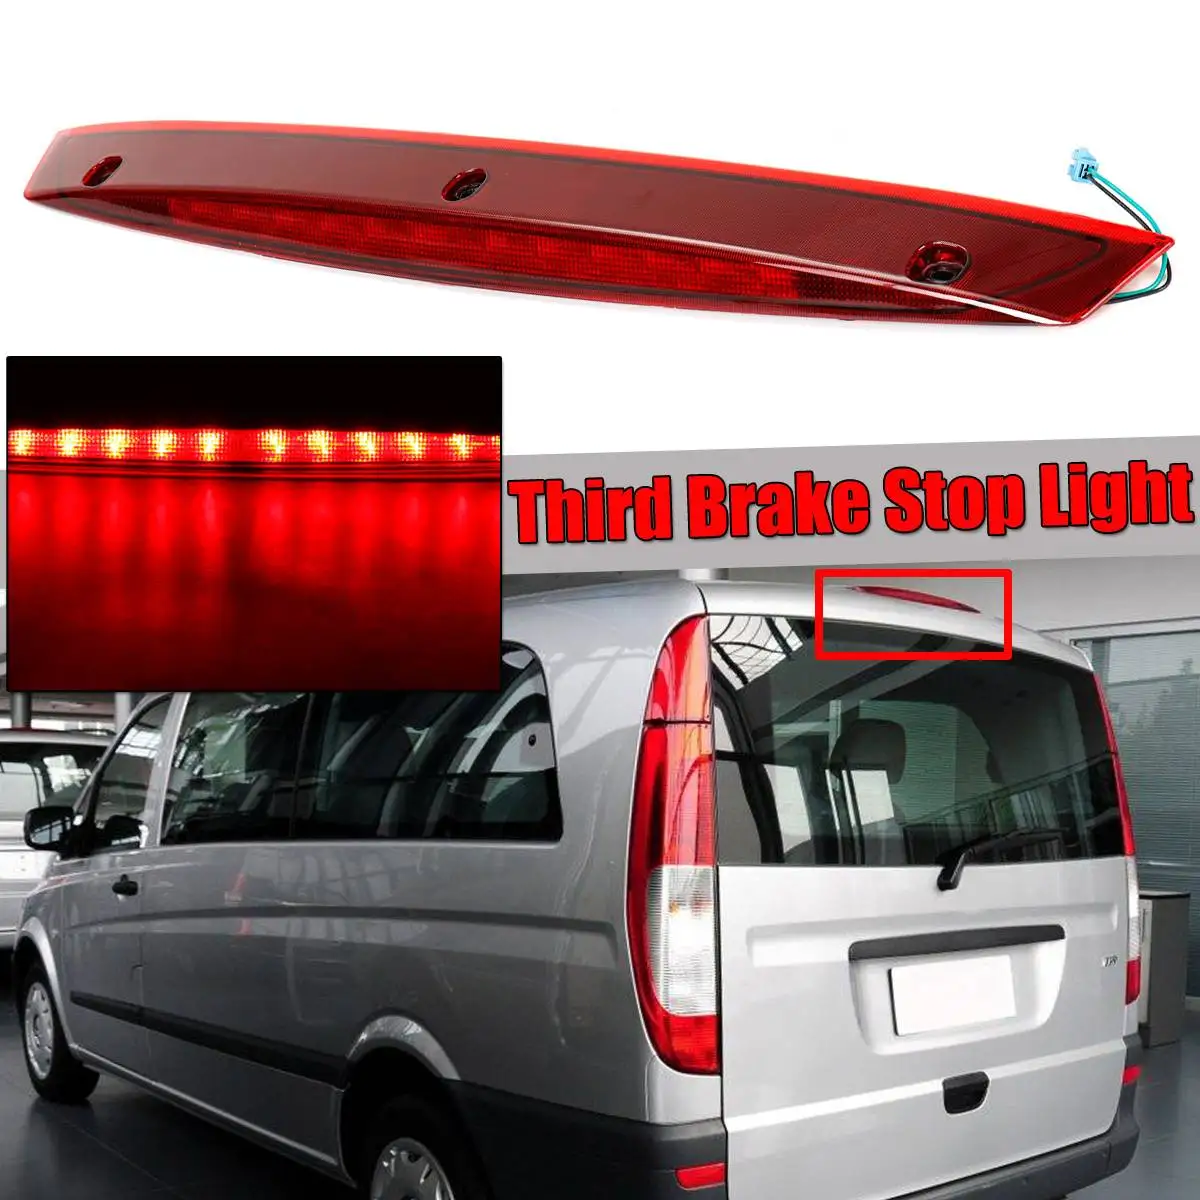 W639 Car Tail Light High Mount 3rd Rear Third Brake Light Stop Lamp For Mercedes For Benz Vito Viano W639 A6398200056 6398200056